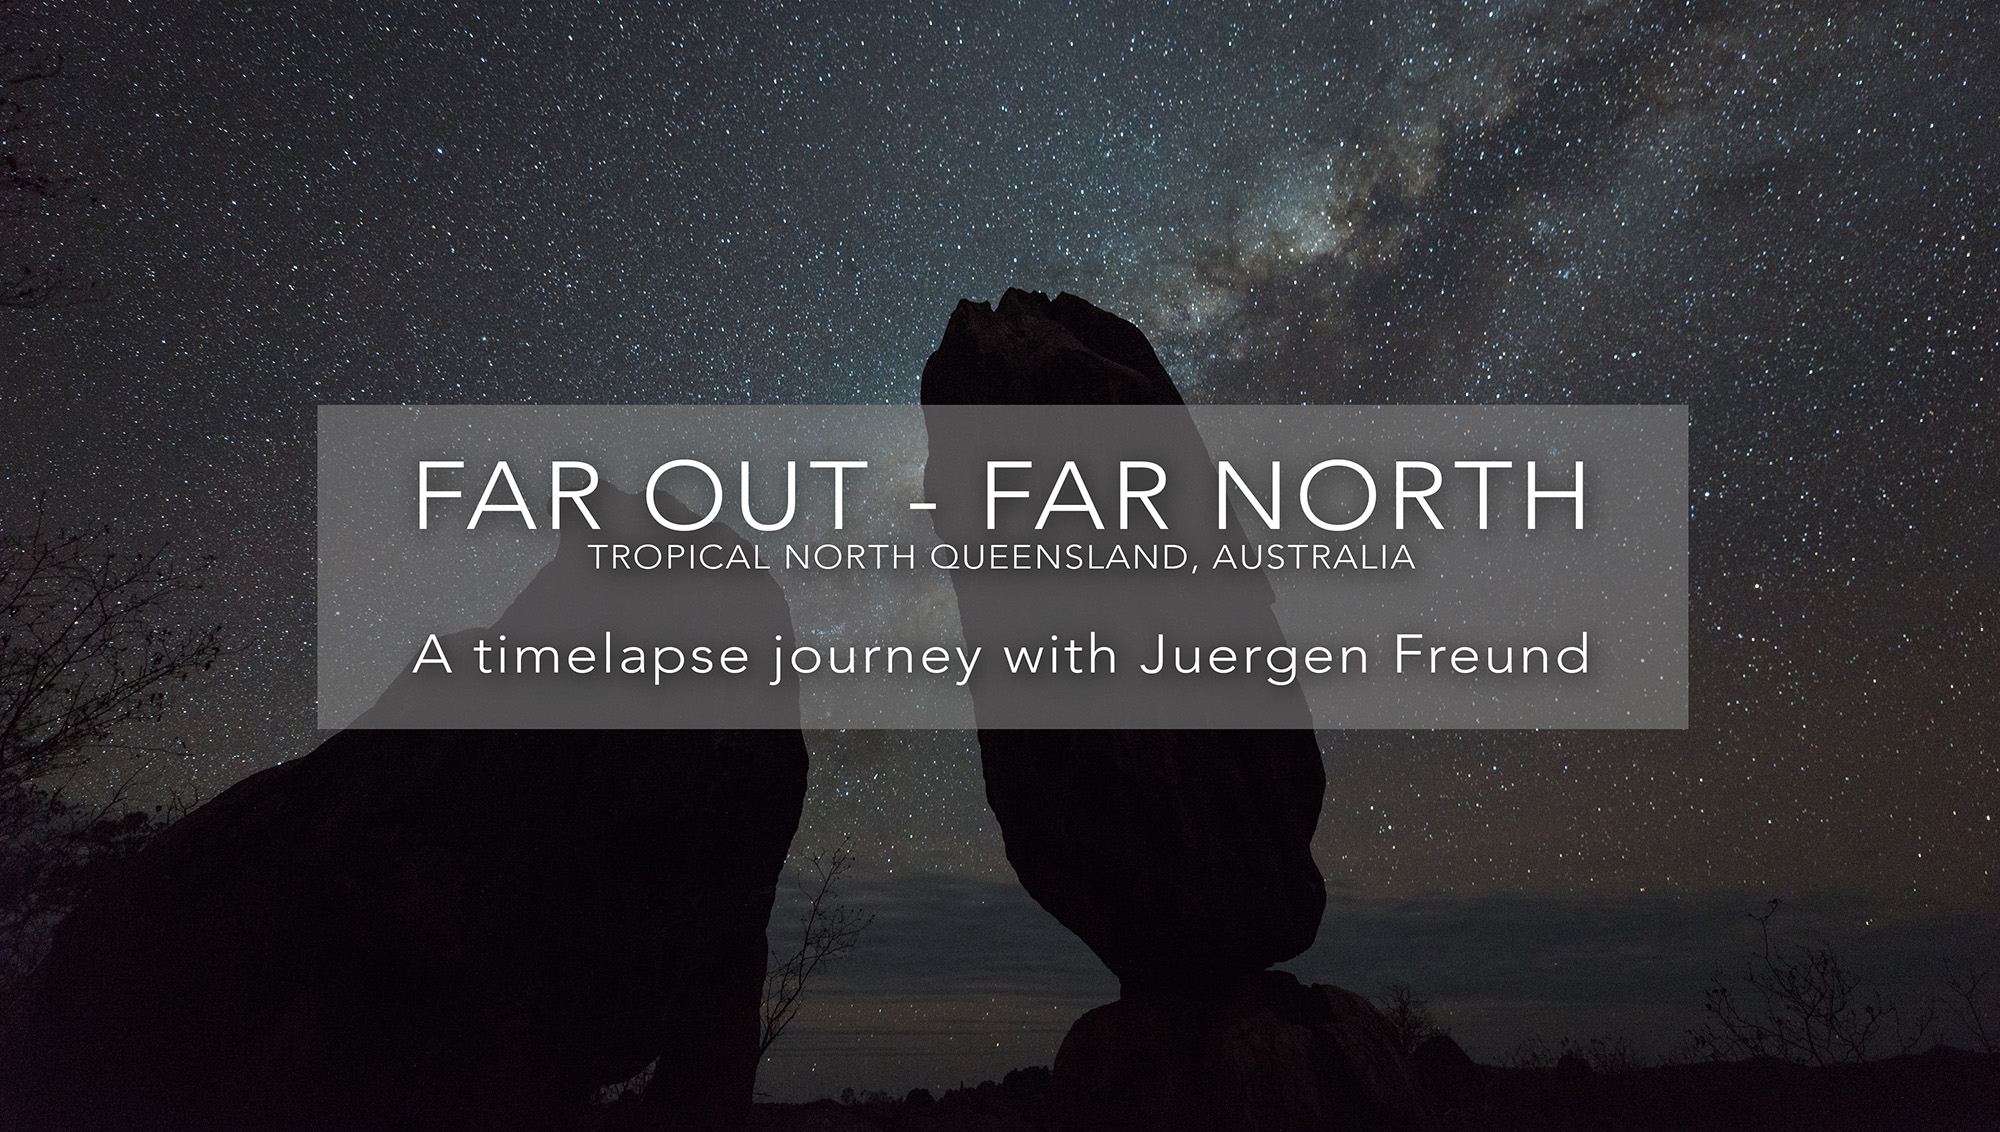 Far Out – Far North, a timelapse journey